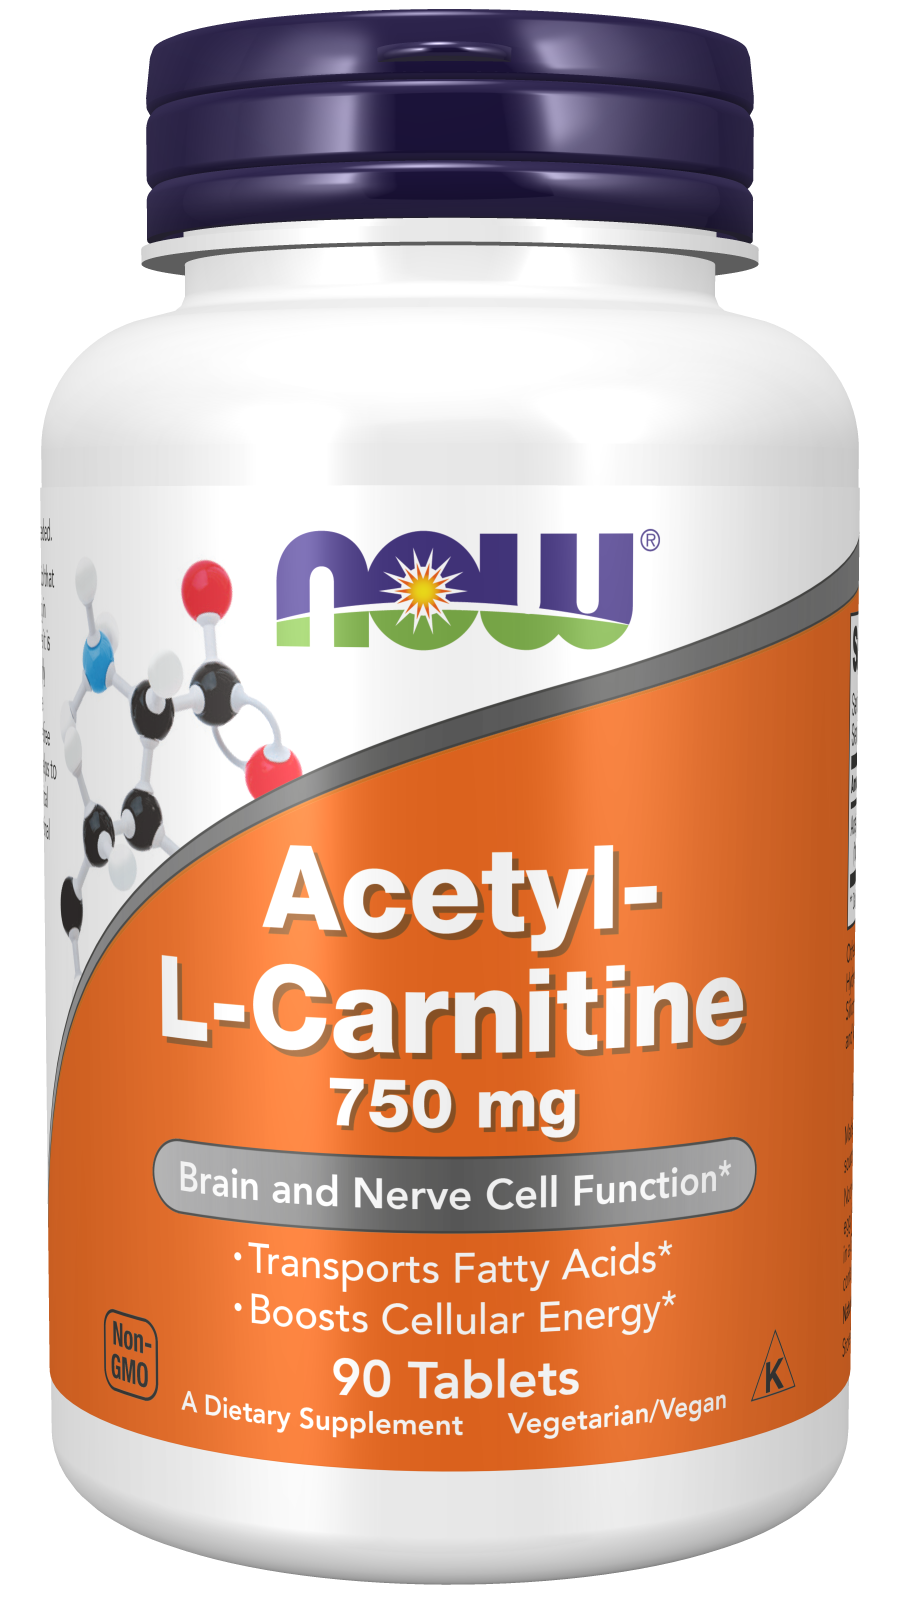 Acetyl-L-Carnitine 750 mg - 90 Tablets Bottle Front